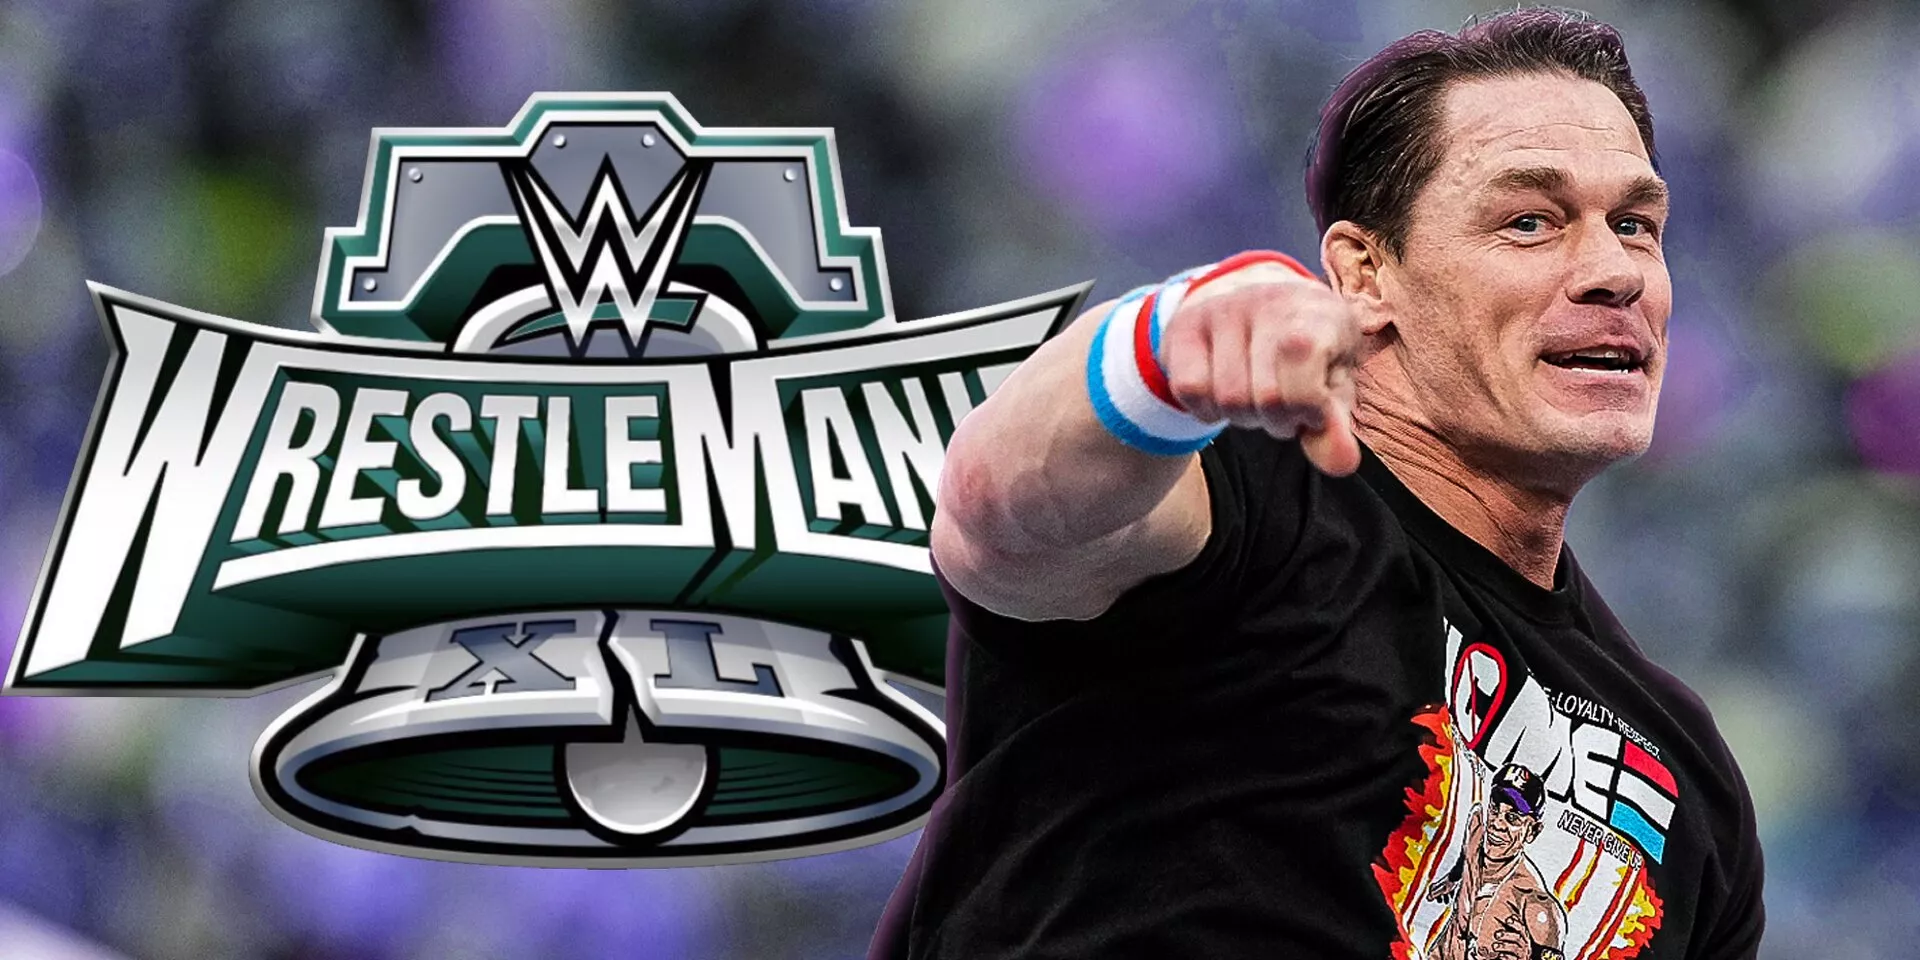 John Cena's top 7 potential opponents for WWE WrestleMania 40